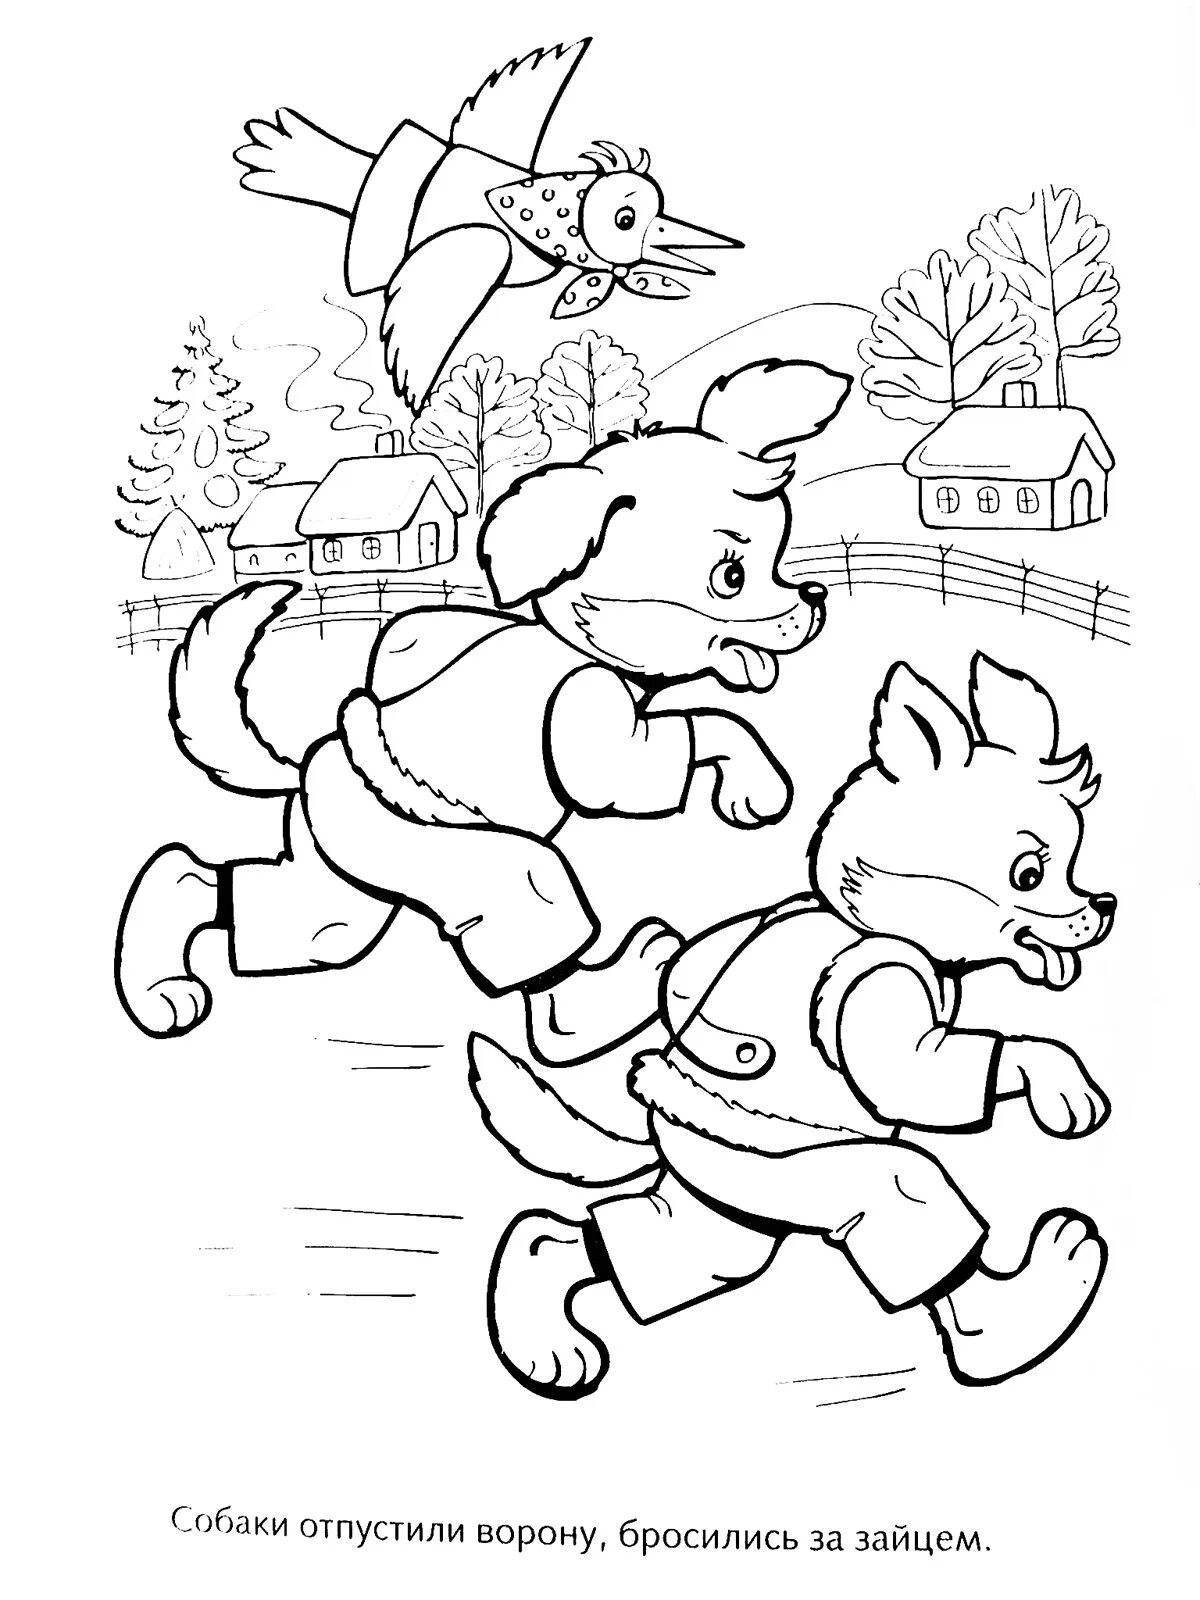 Coloring book funny fox and hare